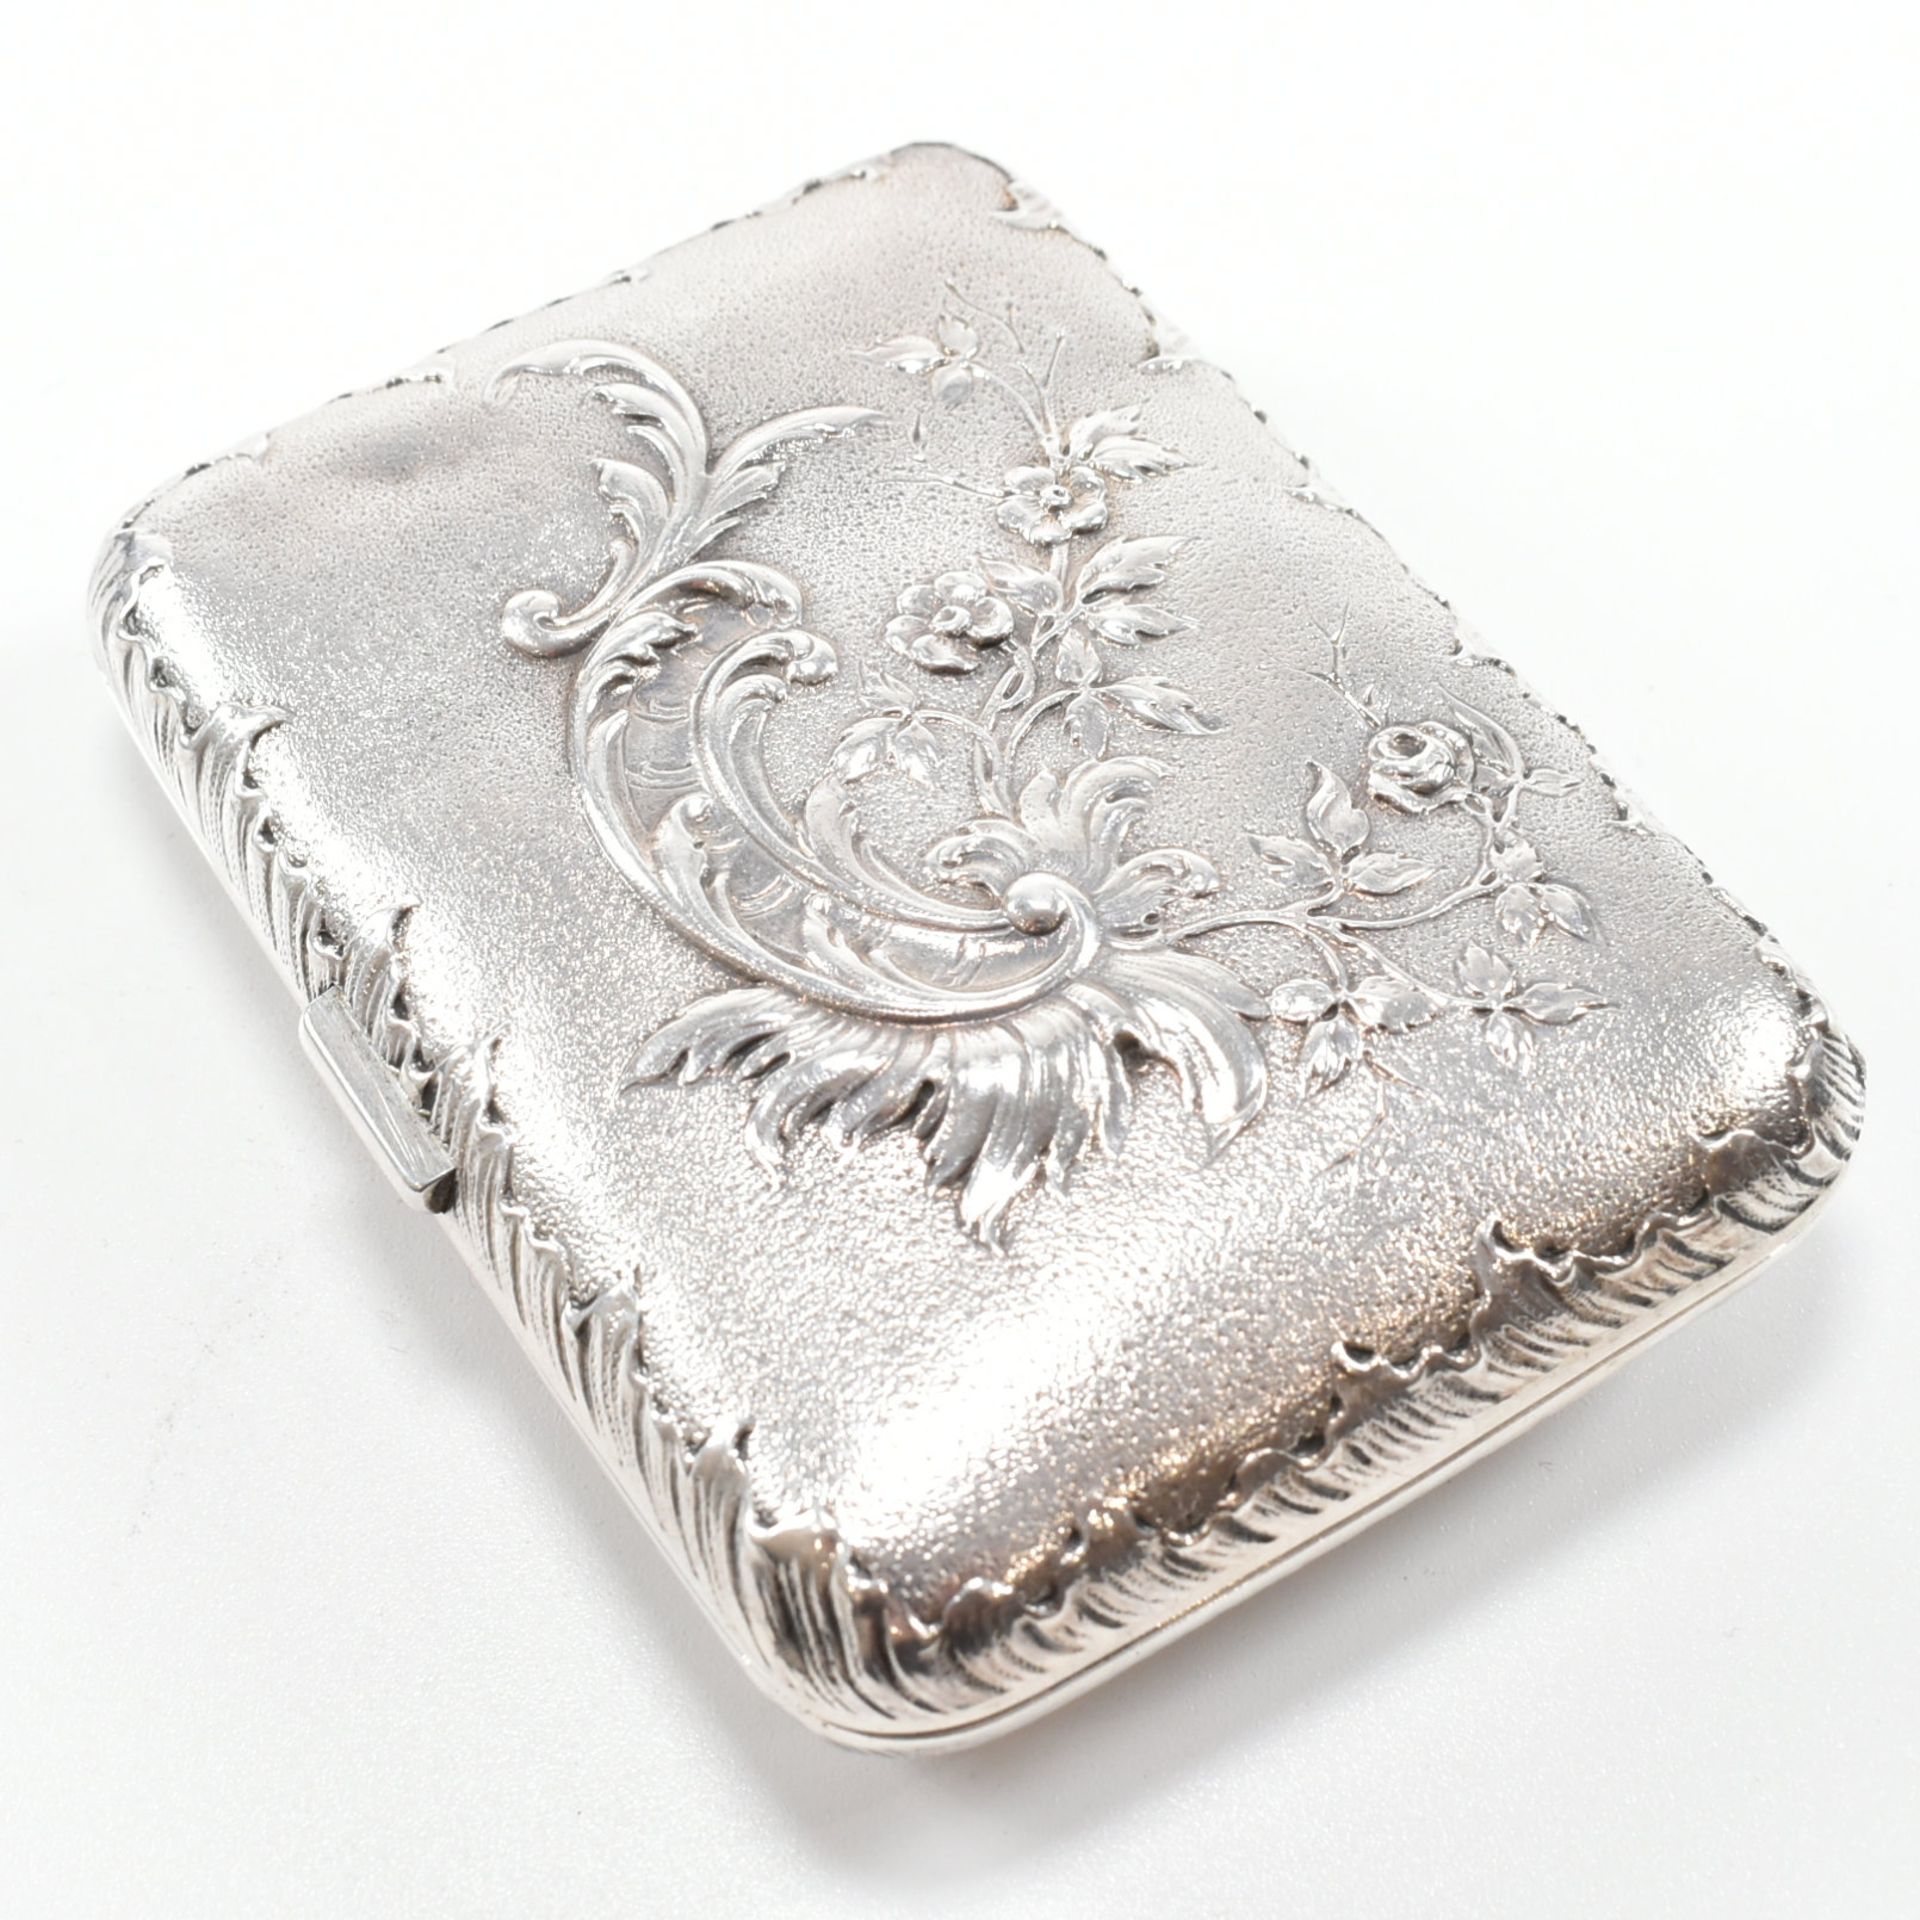 COLLECTION OF 20TH CENTURY SILVER PLATE WHITE METAL & ALPACCA CIGARETTE CASES - Image 11 of 15